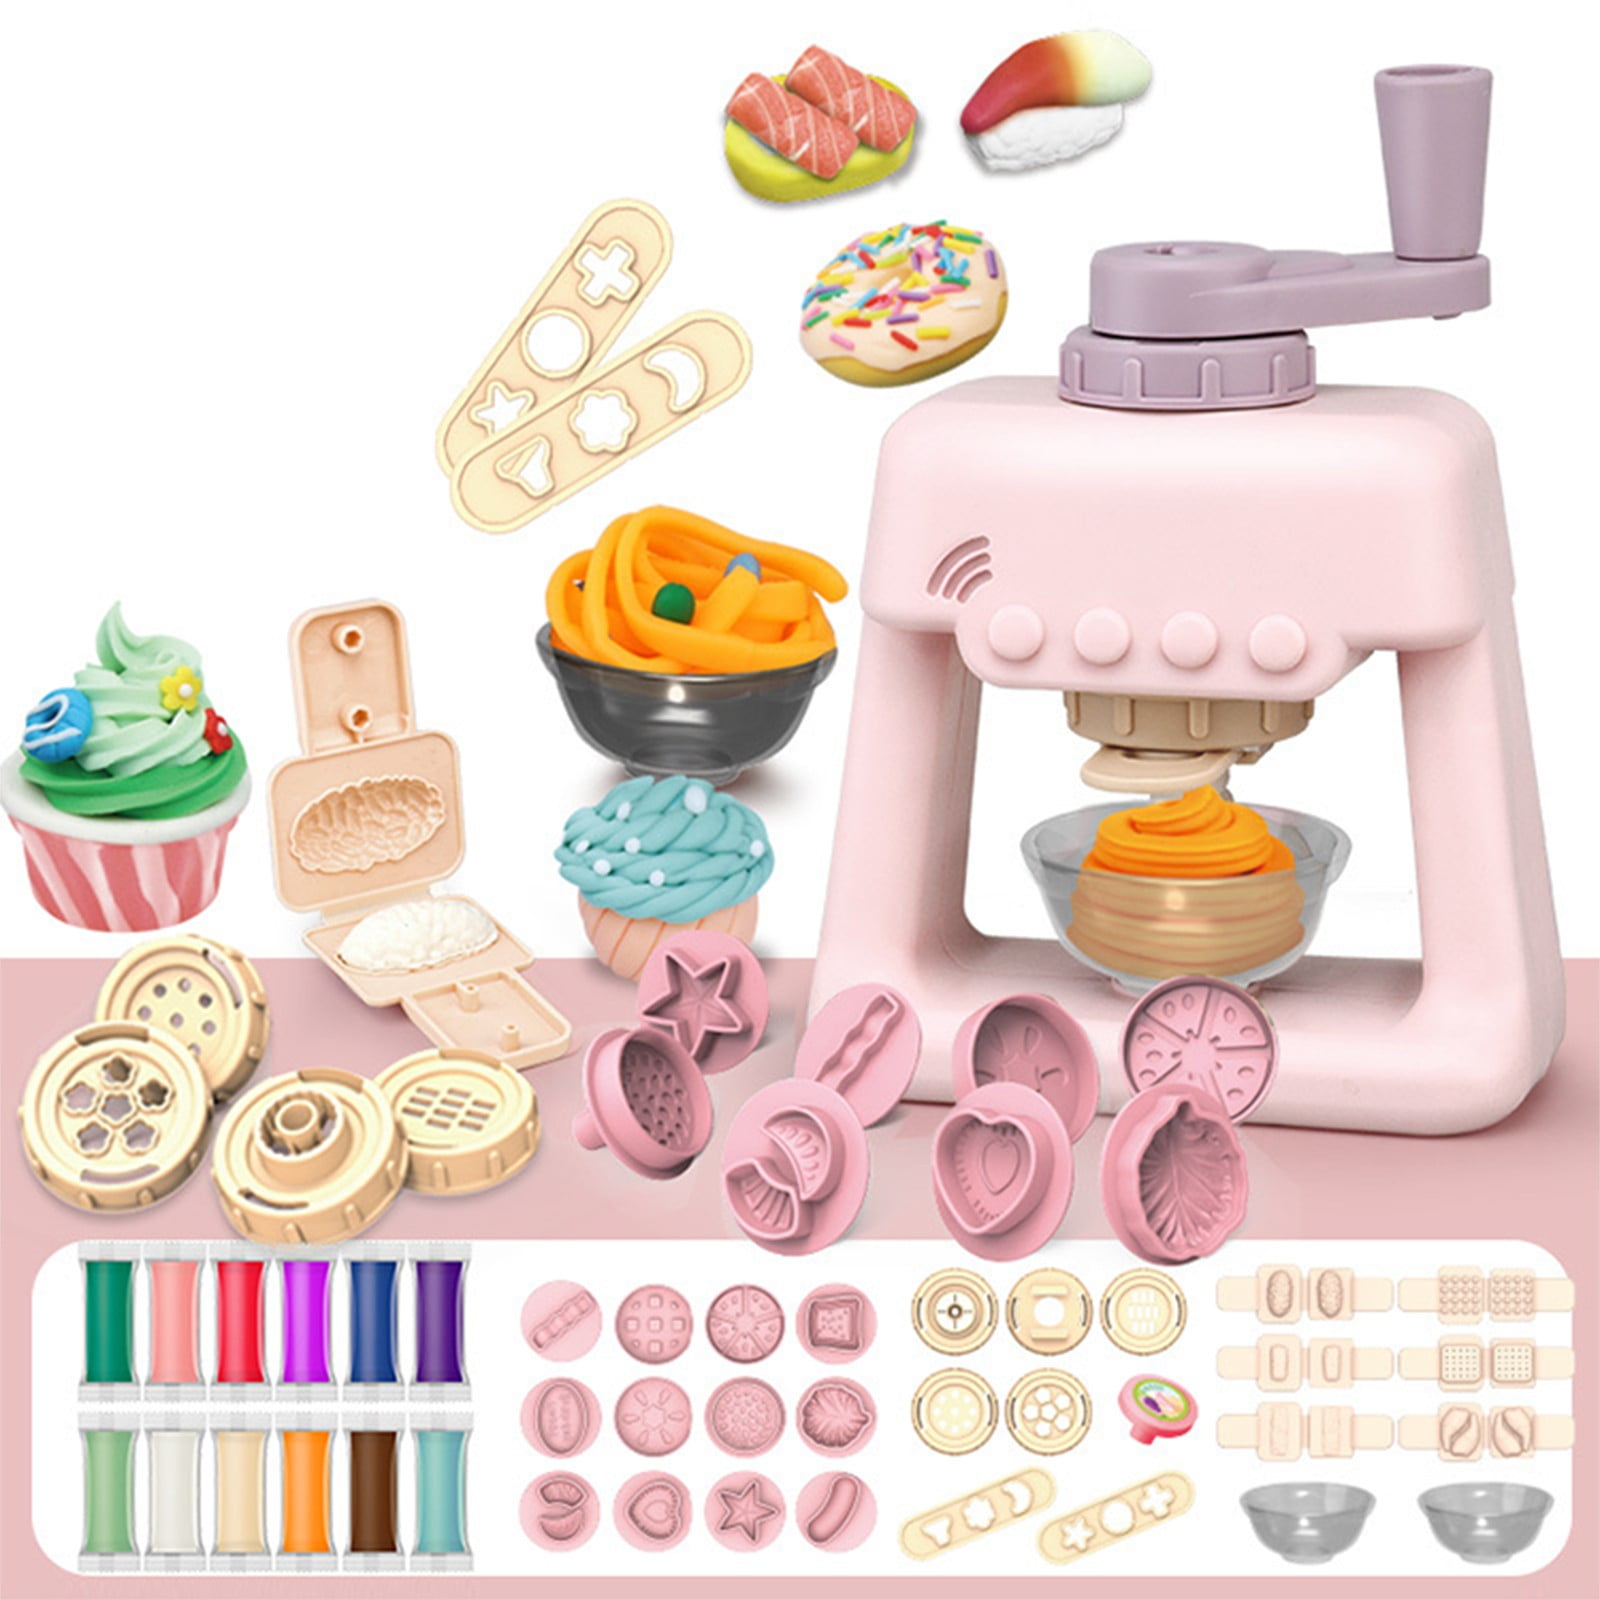 Color Dough for Kids Play Toys, Noetoy 26 Pcs Ice Cream Maker Machine Color Dough Set with 12 Cans Dough for 3 4 5 6 7 8 Year Old Girls Boys Kids